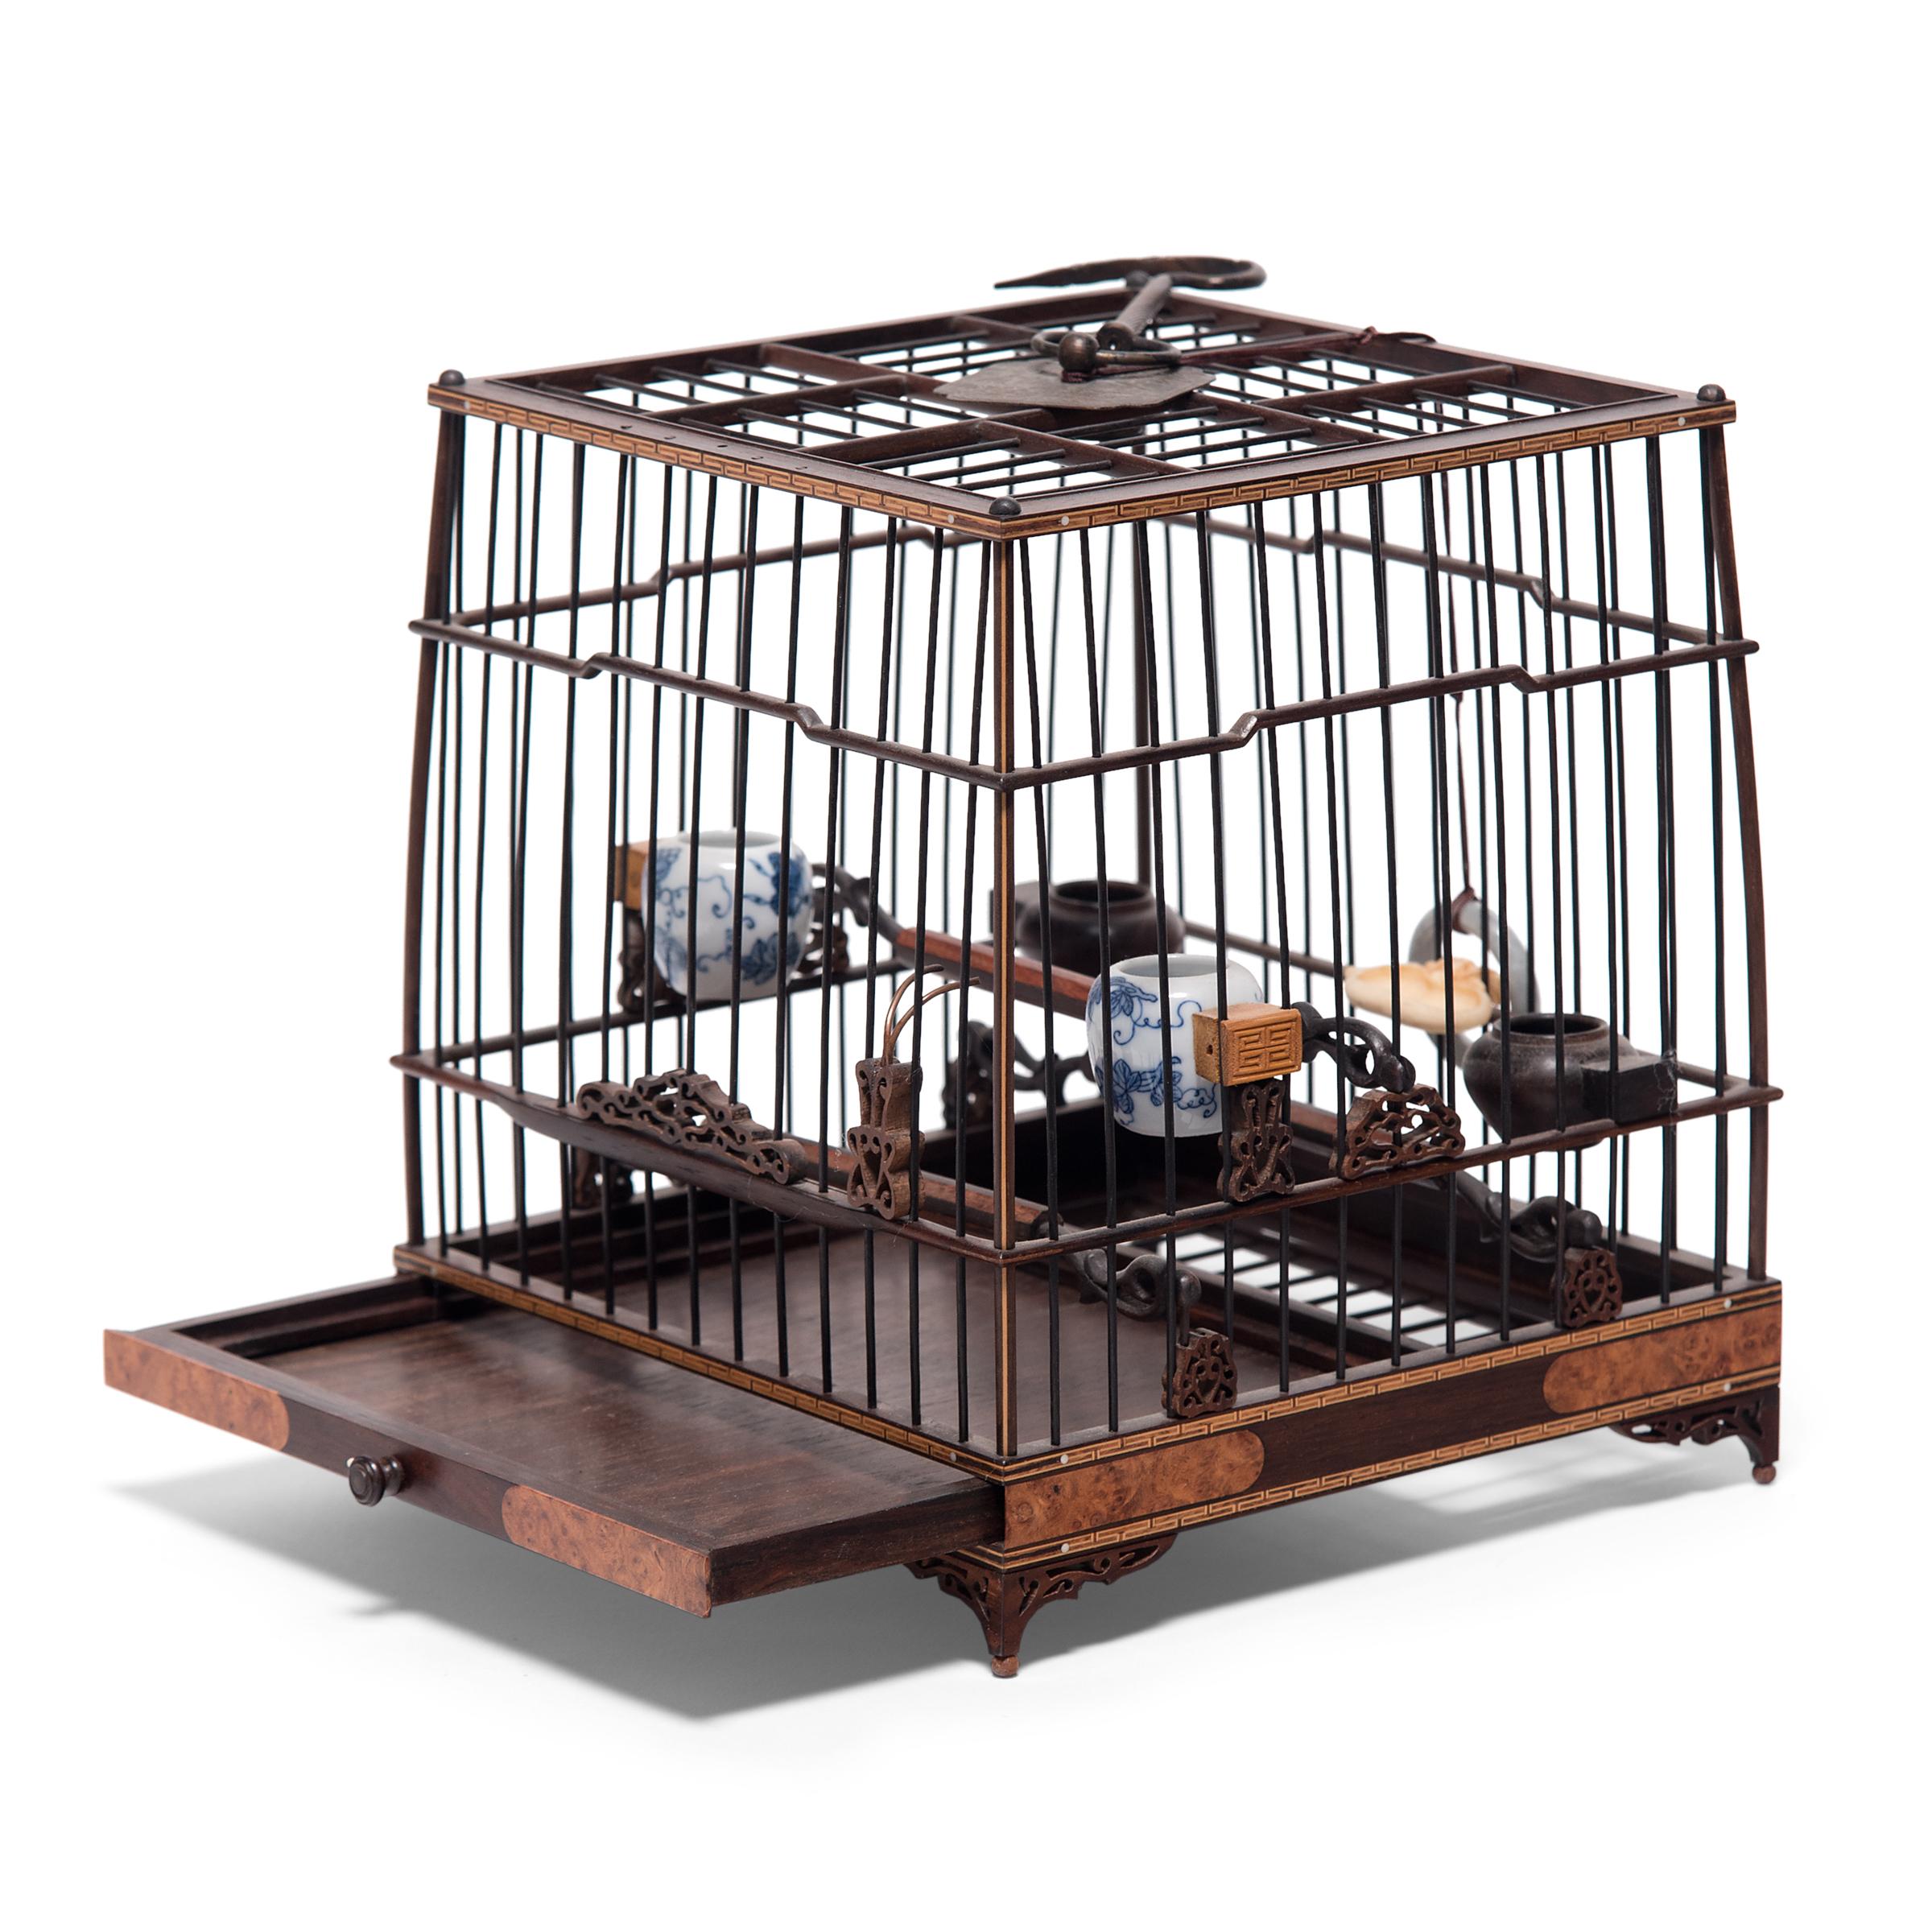 Perfectly proportioned and delightfully ornate, this wooden birdcage was once home to the pet of a Qing-dynasty aristocrat. Dated to the mid-19th century, the square birdcage is carefully assembled of thin rods of dark hardwood and trimmed with fine